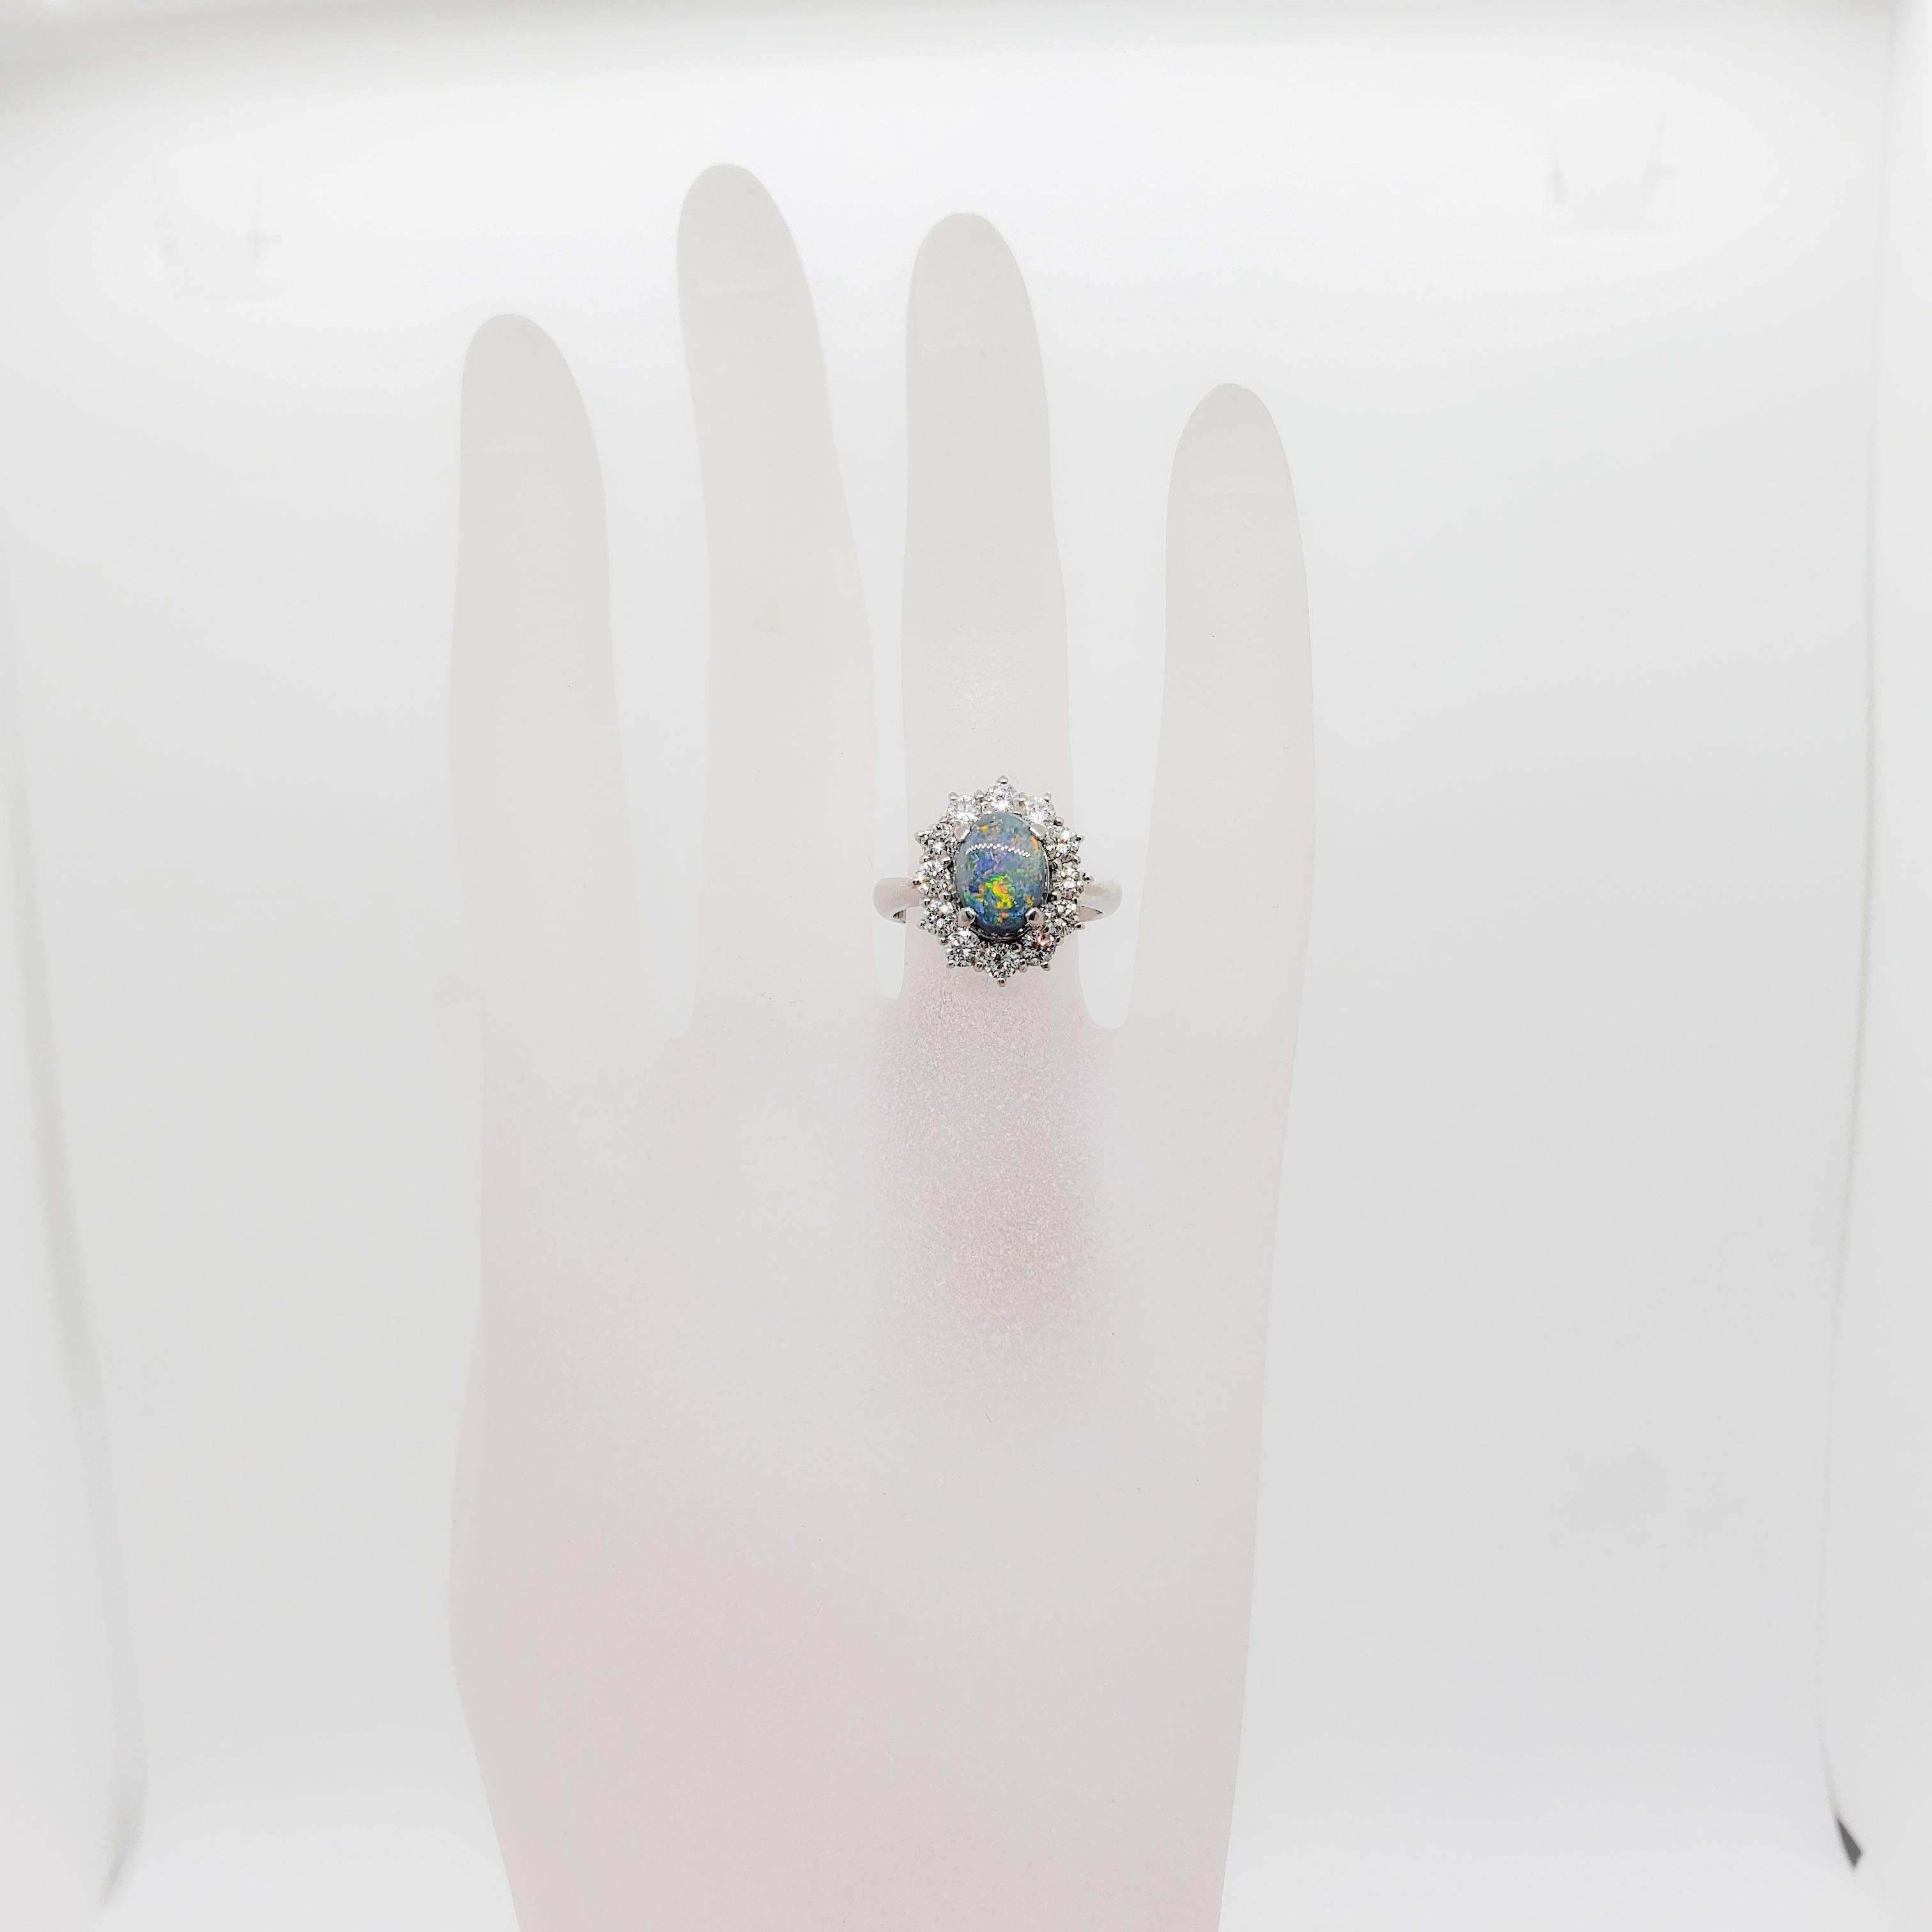 Stunning 1.86 ct black opal oval cabochon with a greyish blue color and sparks of orange, yellow, and green.  1.00 ct. of good quality, white, and bright diamond rounds.  Handmade mounting in platinum.  Ring size 6.5.  Mint condition.